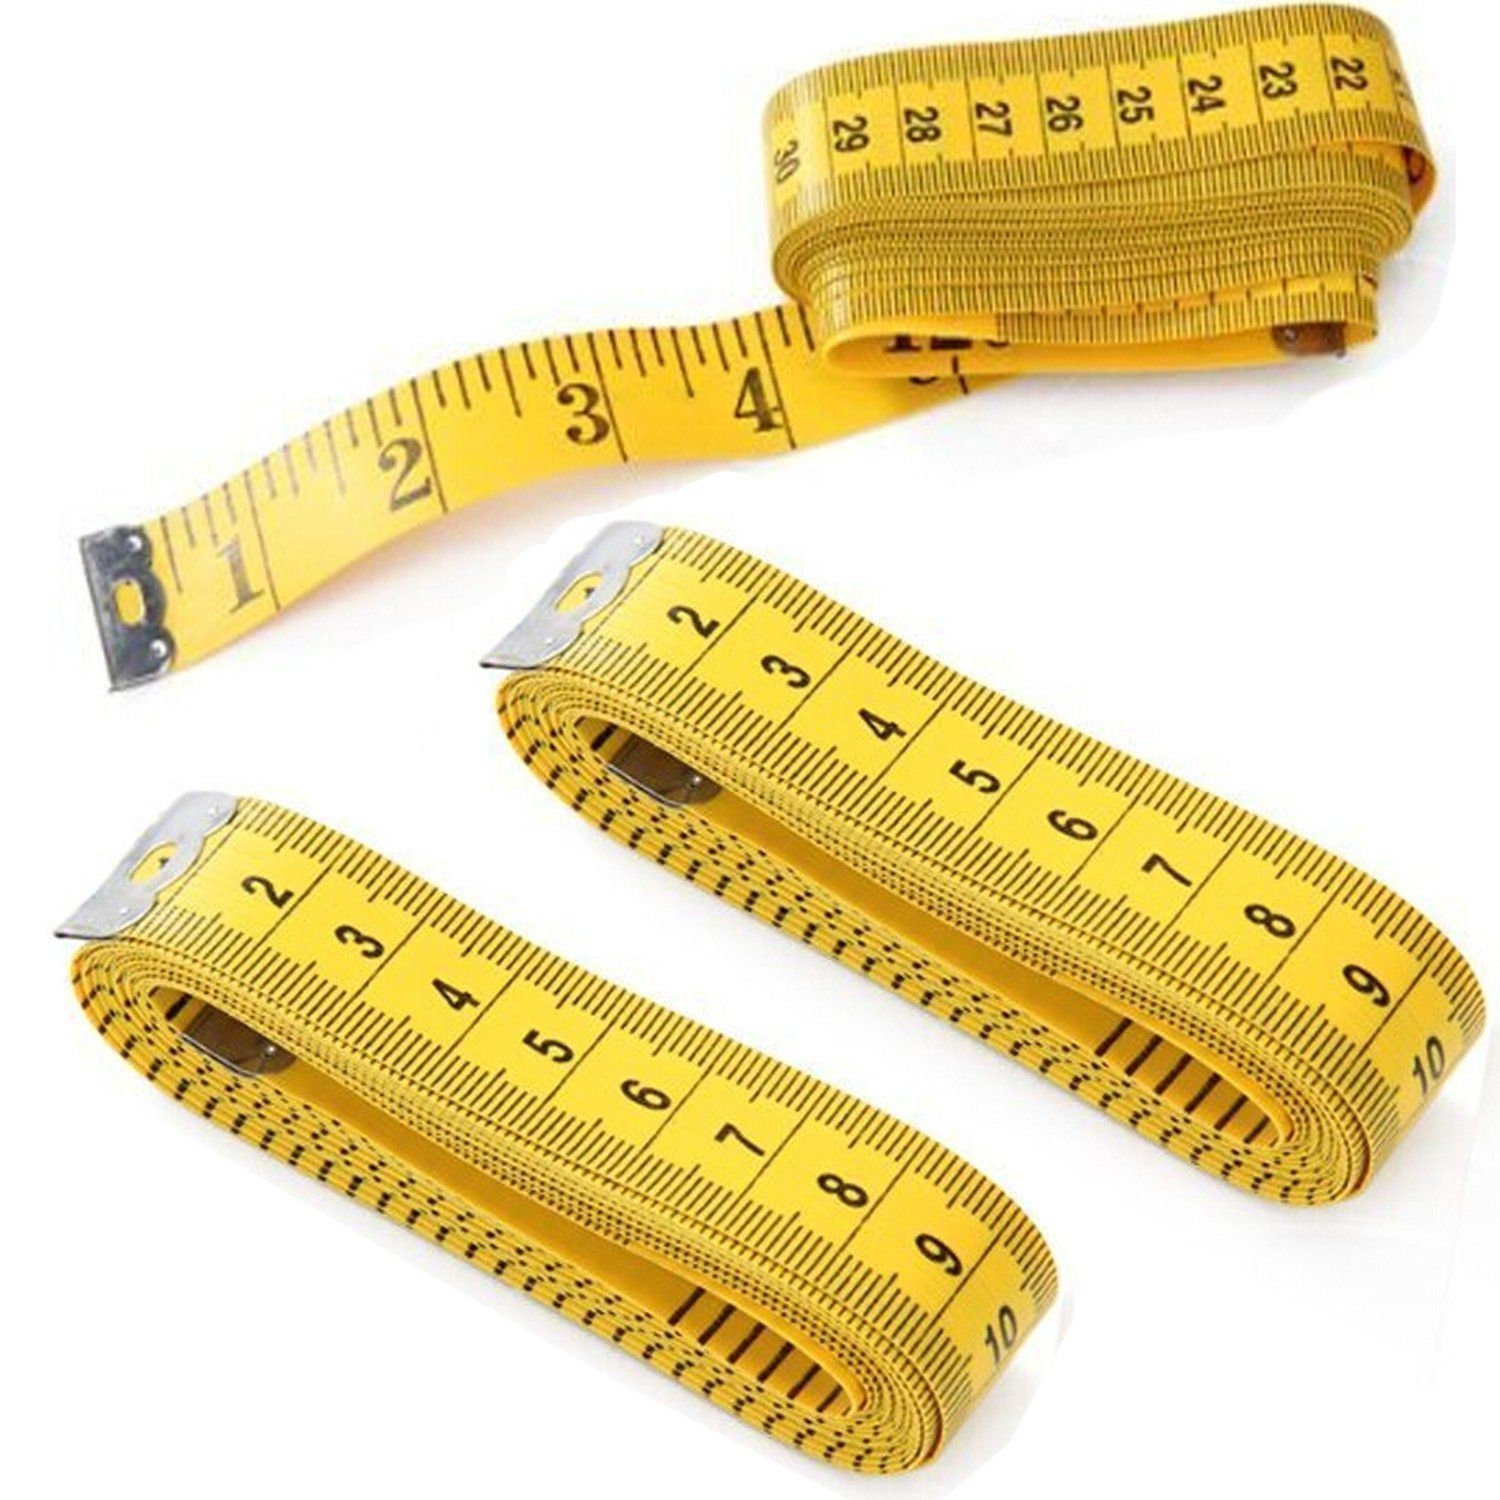 6PCS Soft Tape Measures Double-scale 60-inch/150cm 1/2-inch Wide